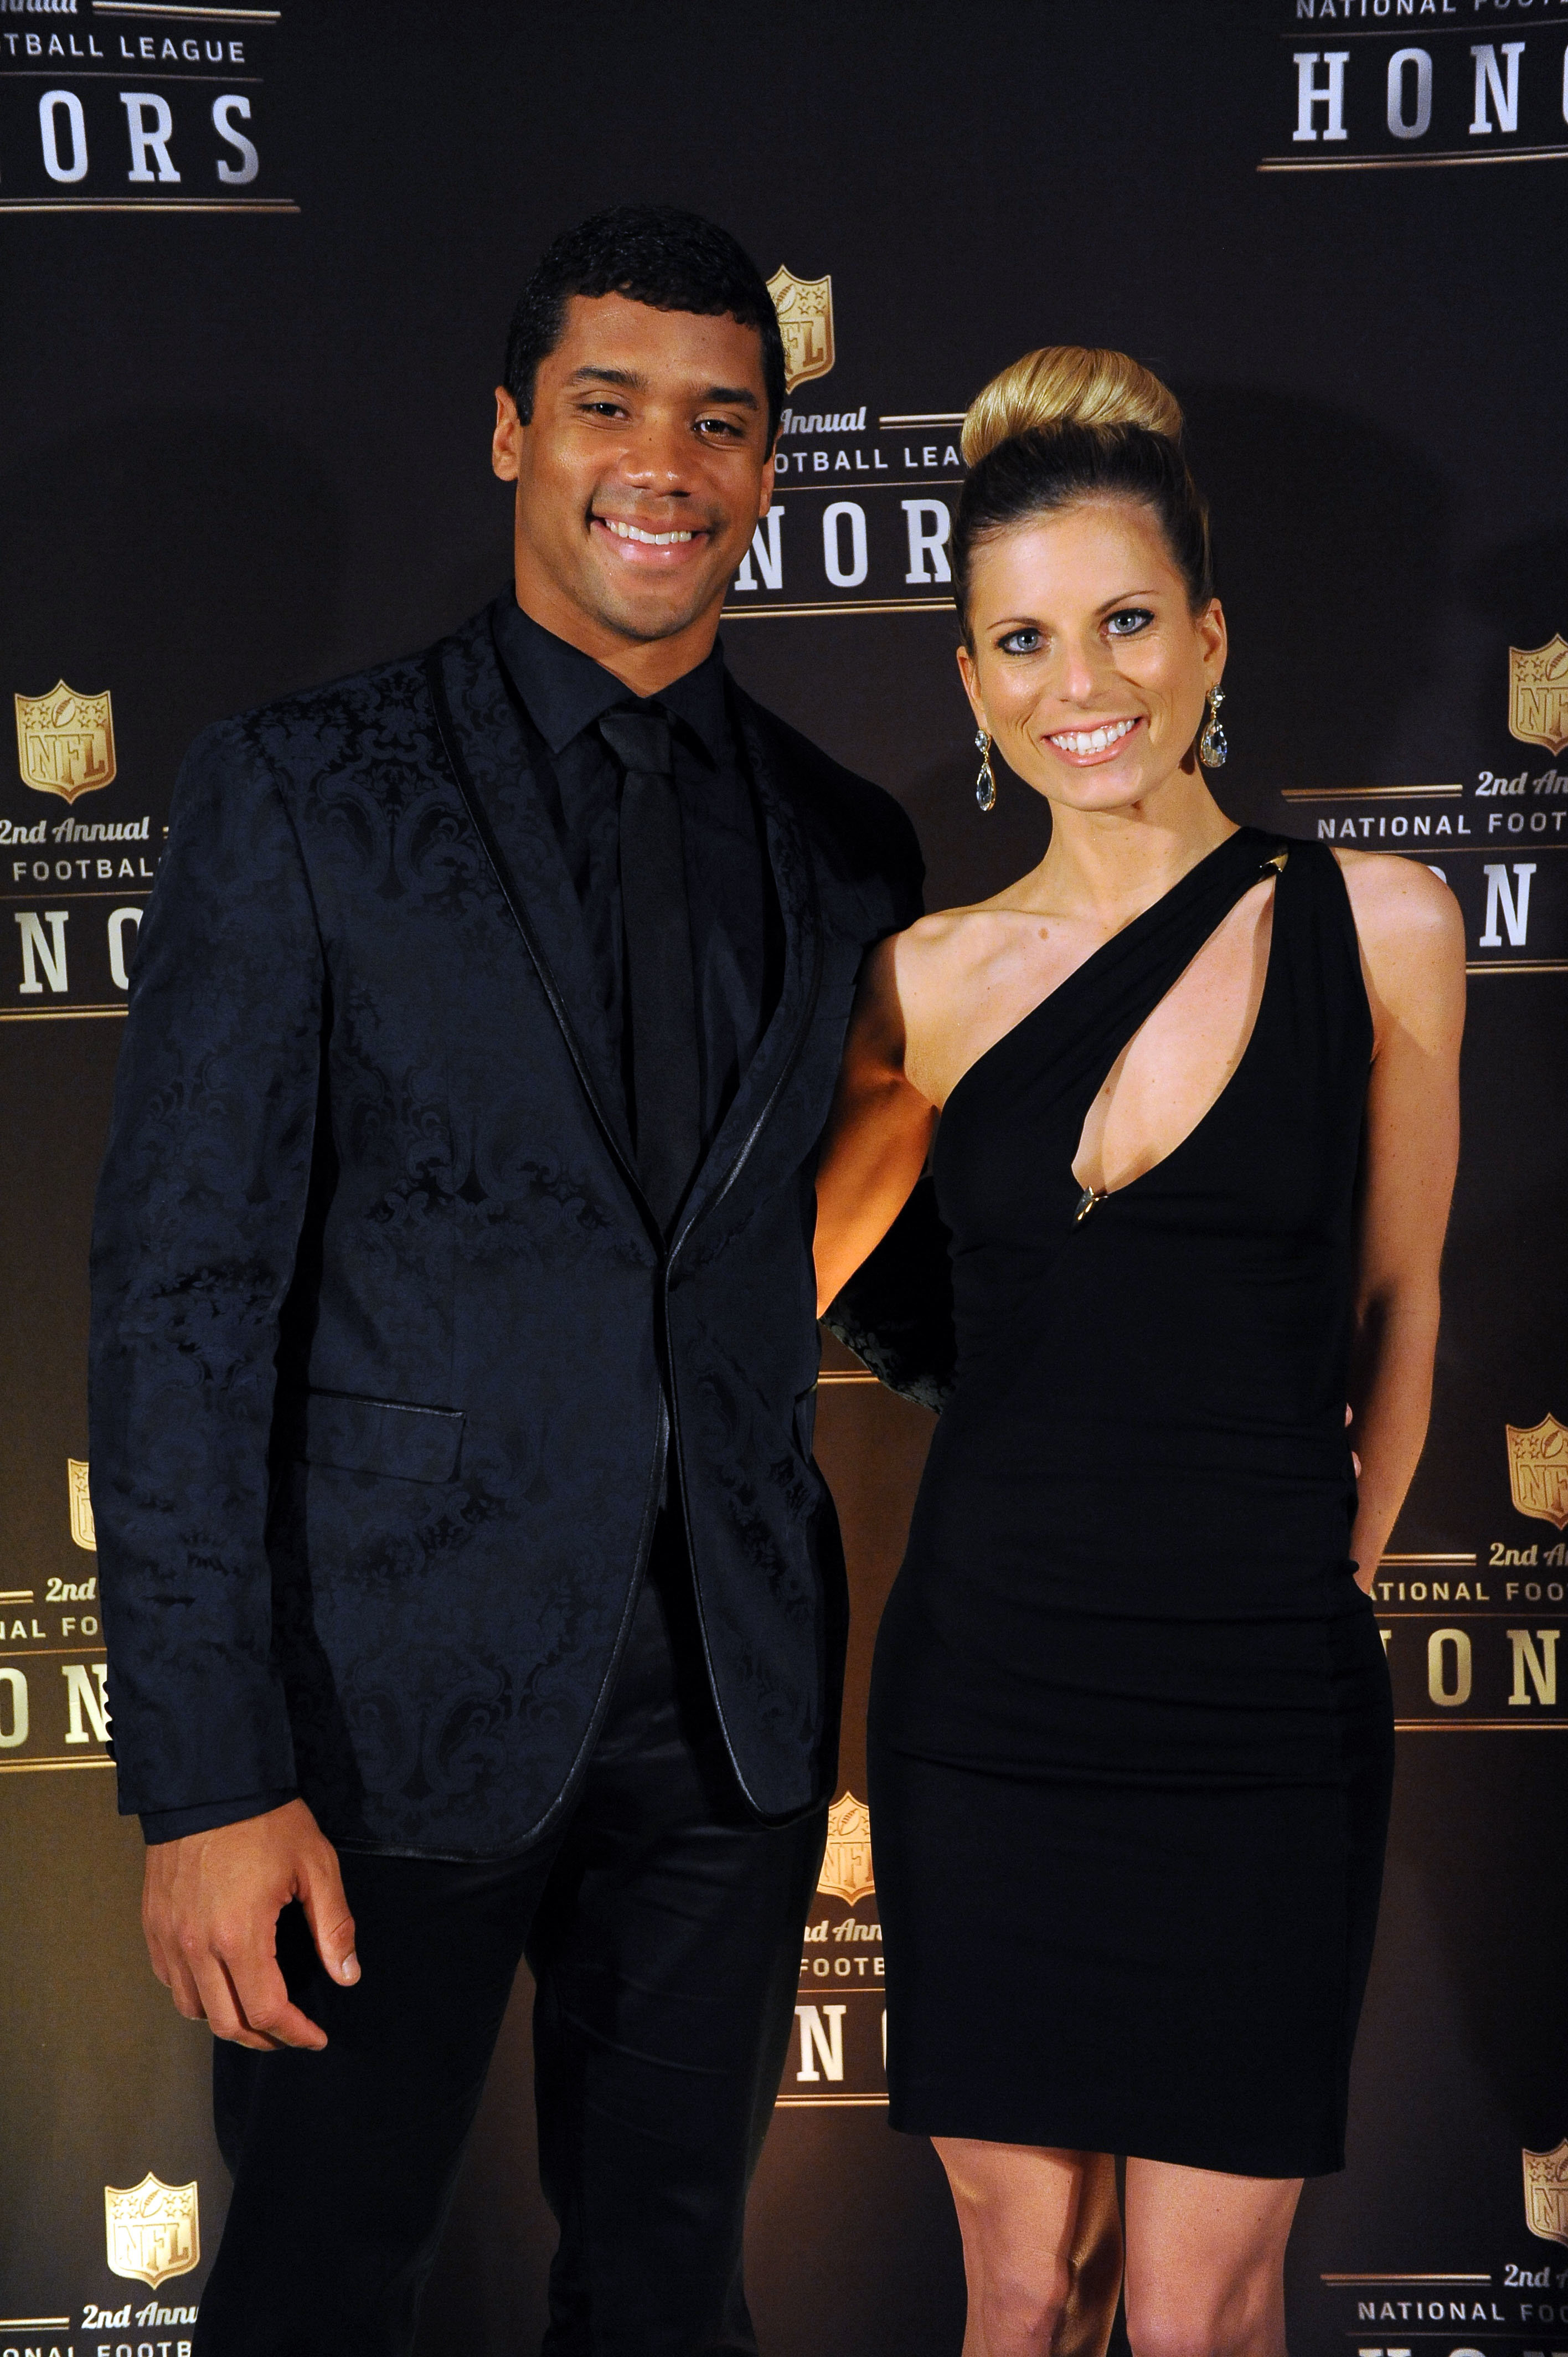 Hot Football Wives And Girlfriends To Distract You From The Super Bowl HuffPost Entertainment